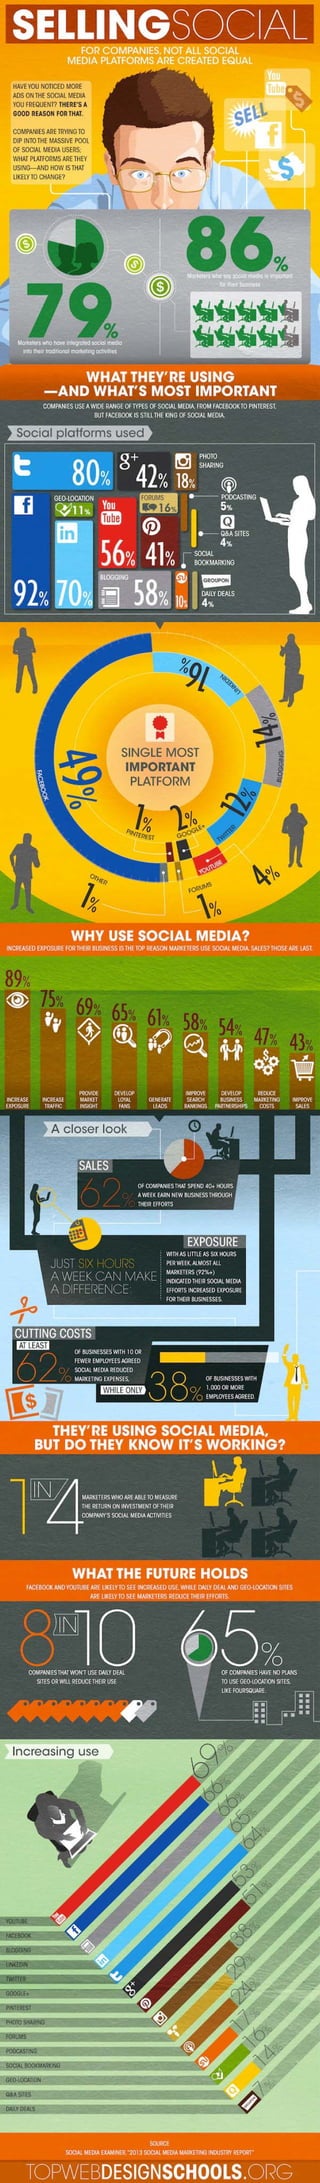 Why Marketers are Using Social Media